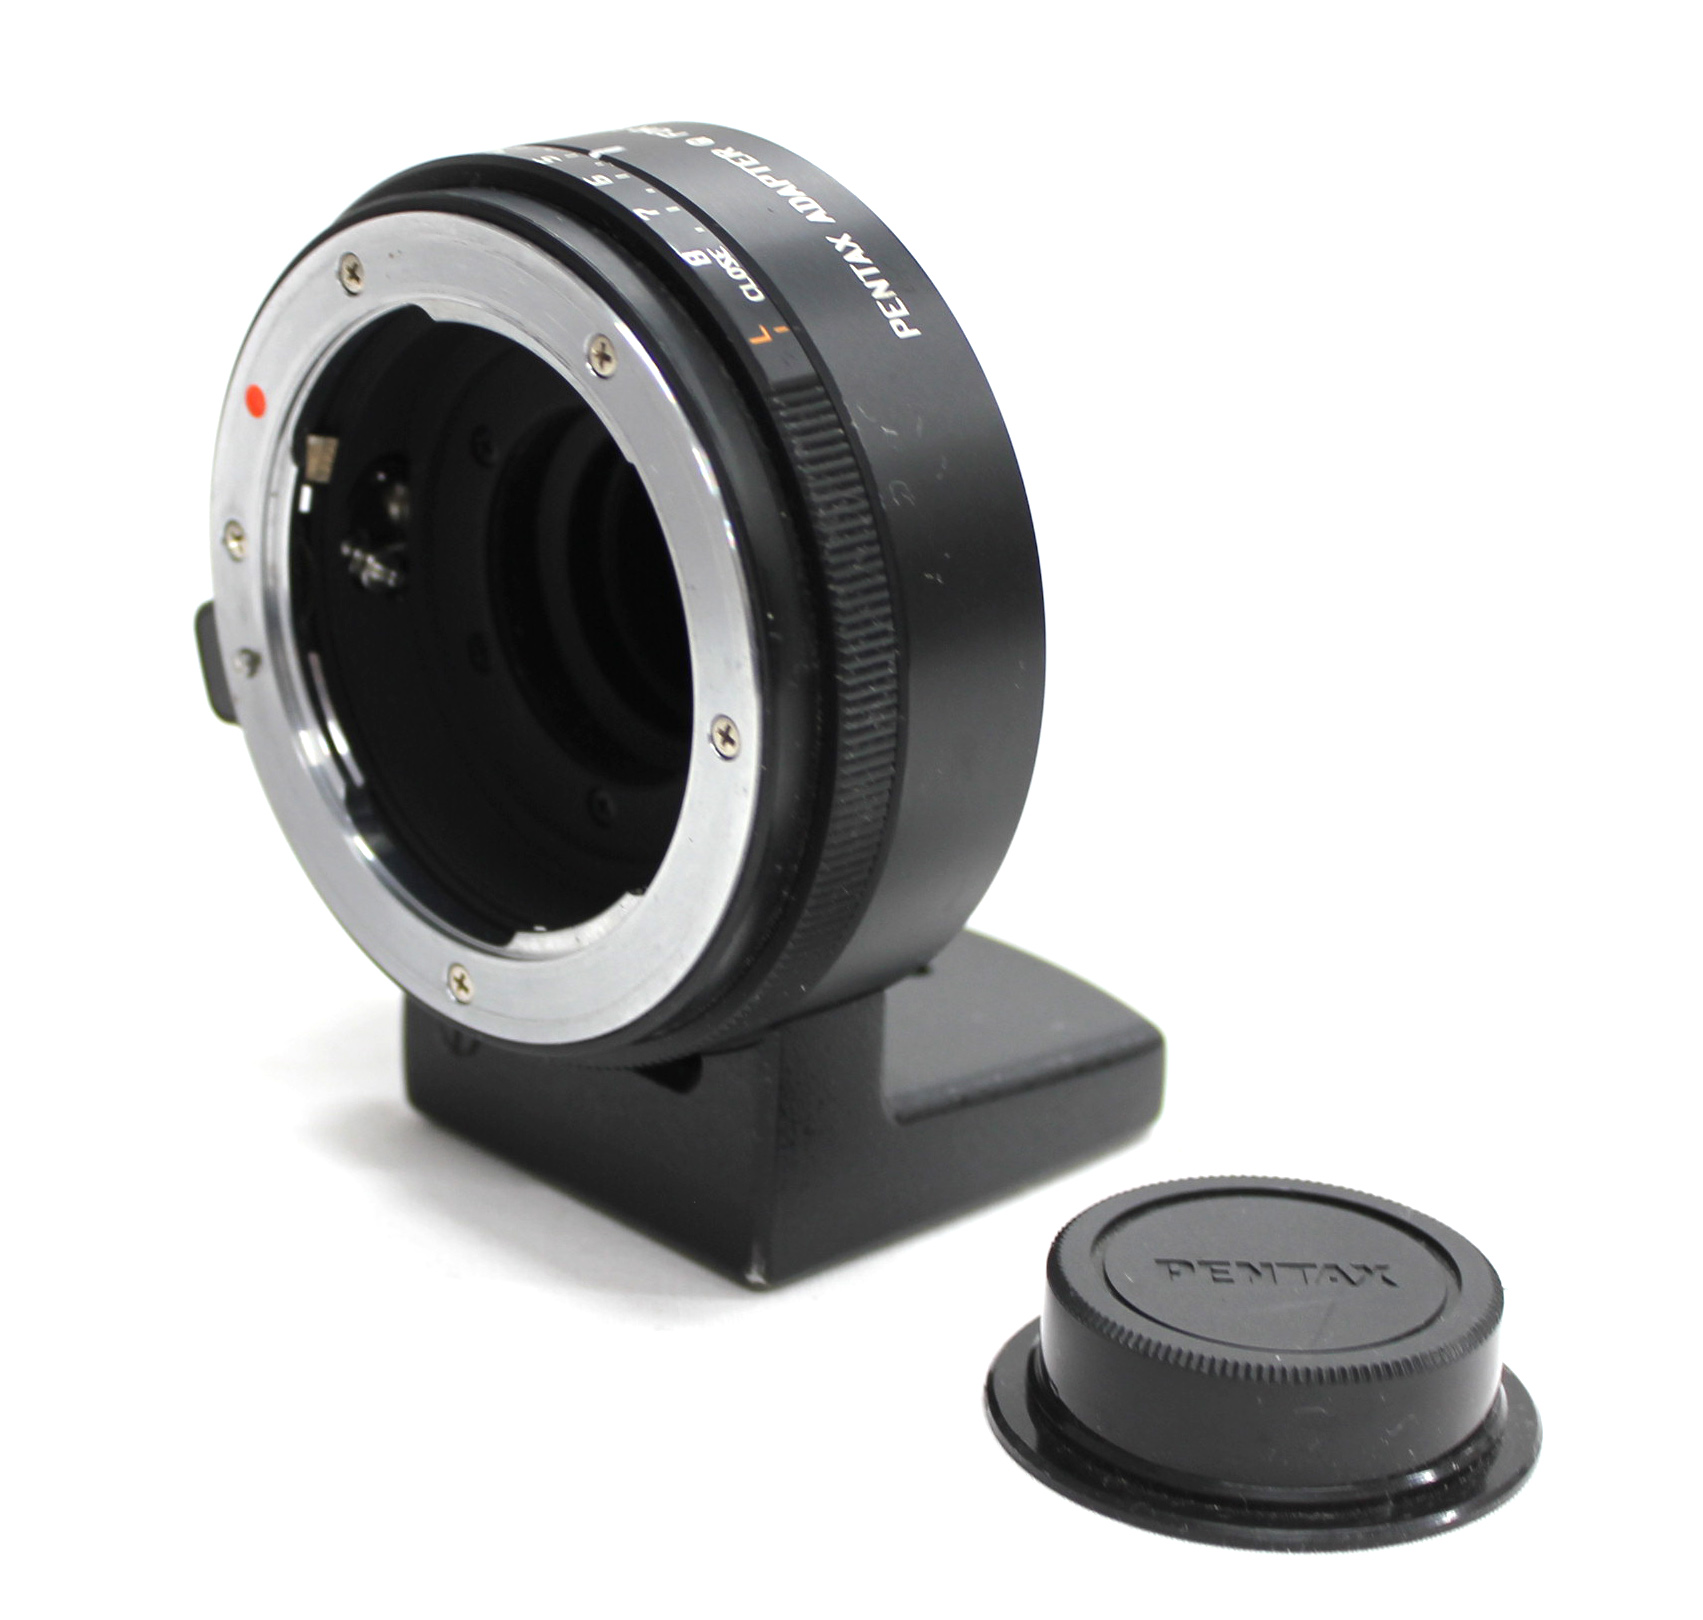 Japan Used Camera Shop | [Excellent+++++] Pentax Adapter Q for K Mount Lens for Q10 Q7 from Japan